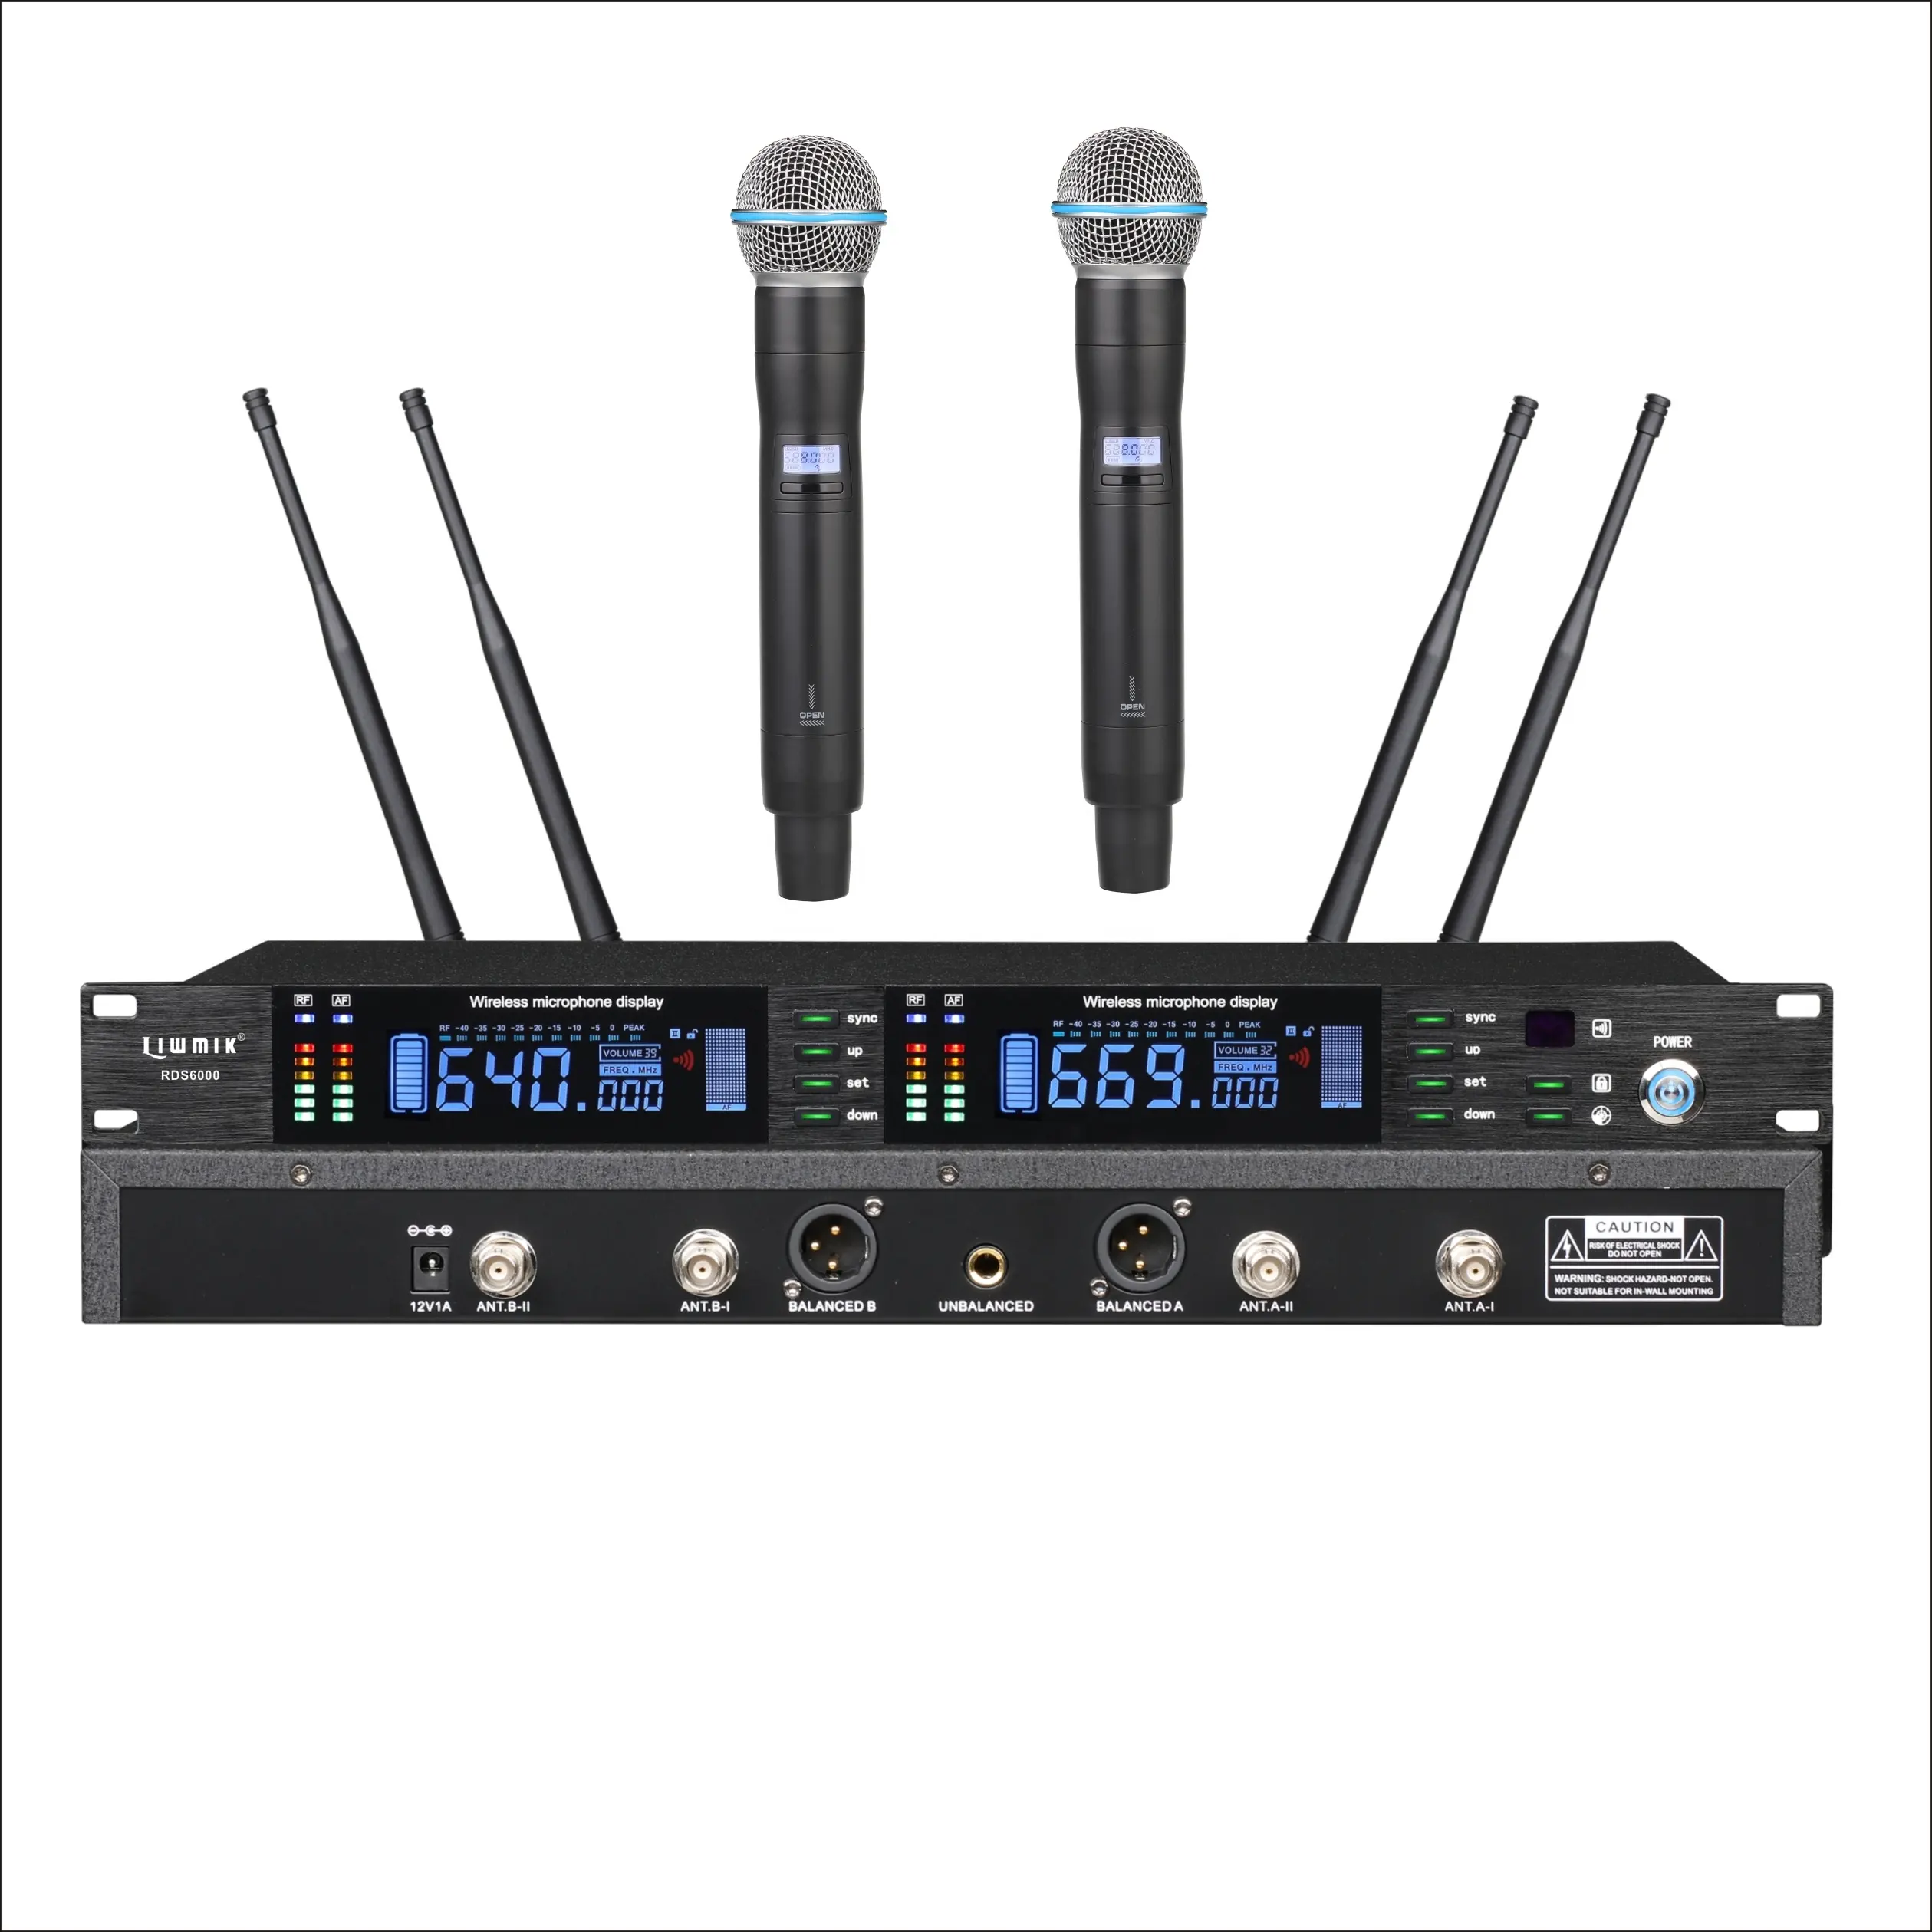 RB6600 Pro UHF Dual-Channel Cordless handheld True Diversity Wireless Microphone System 300 m long range for live show, perform